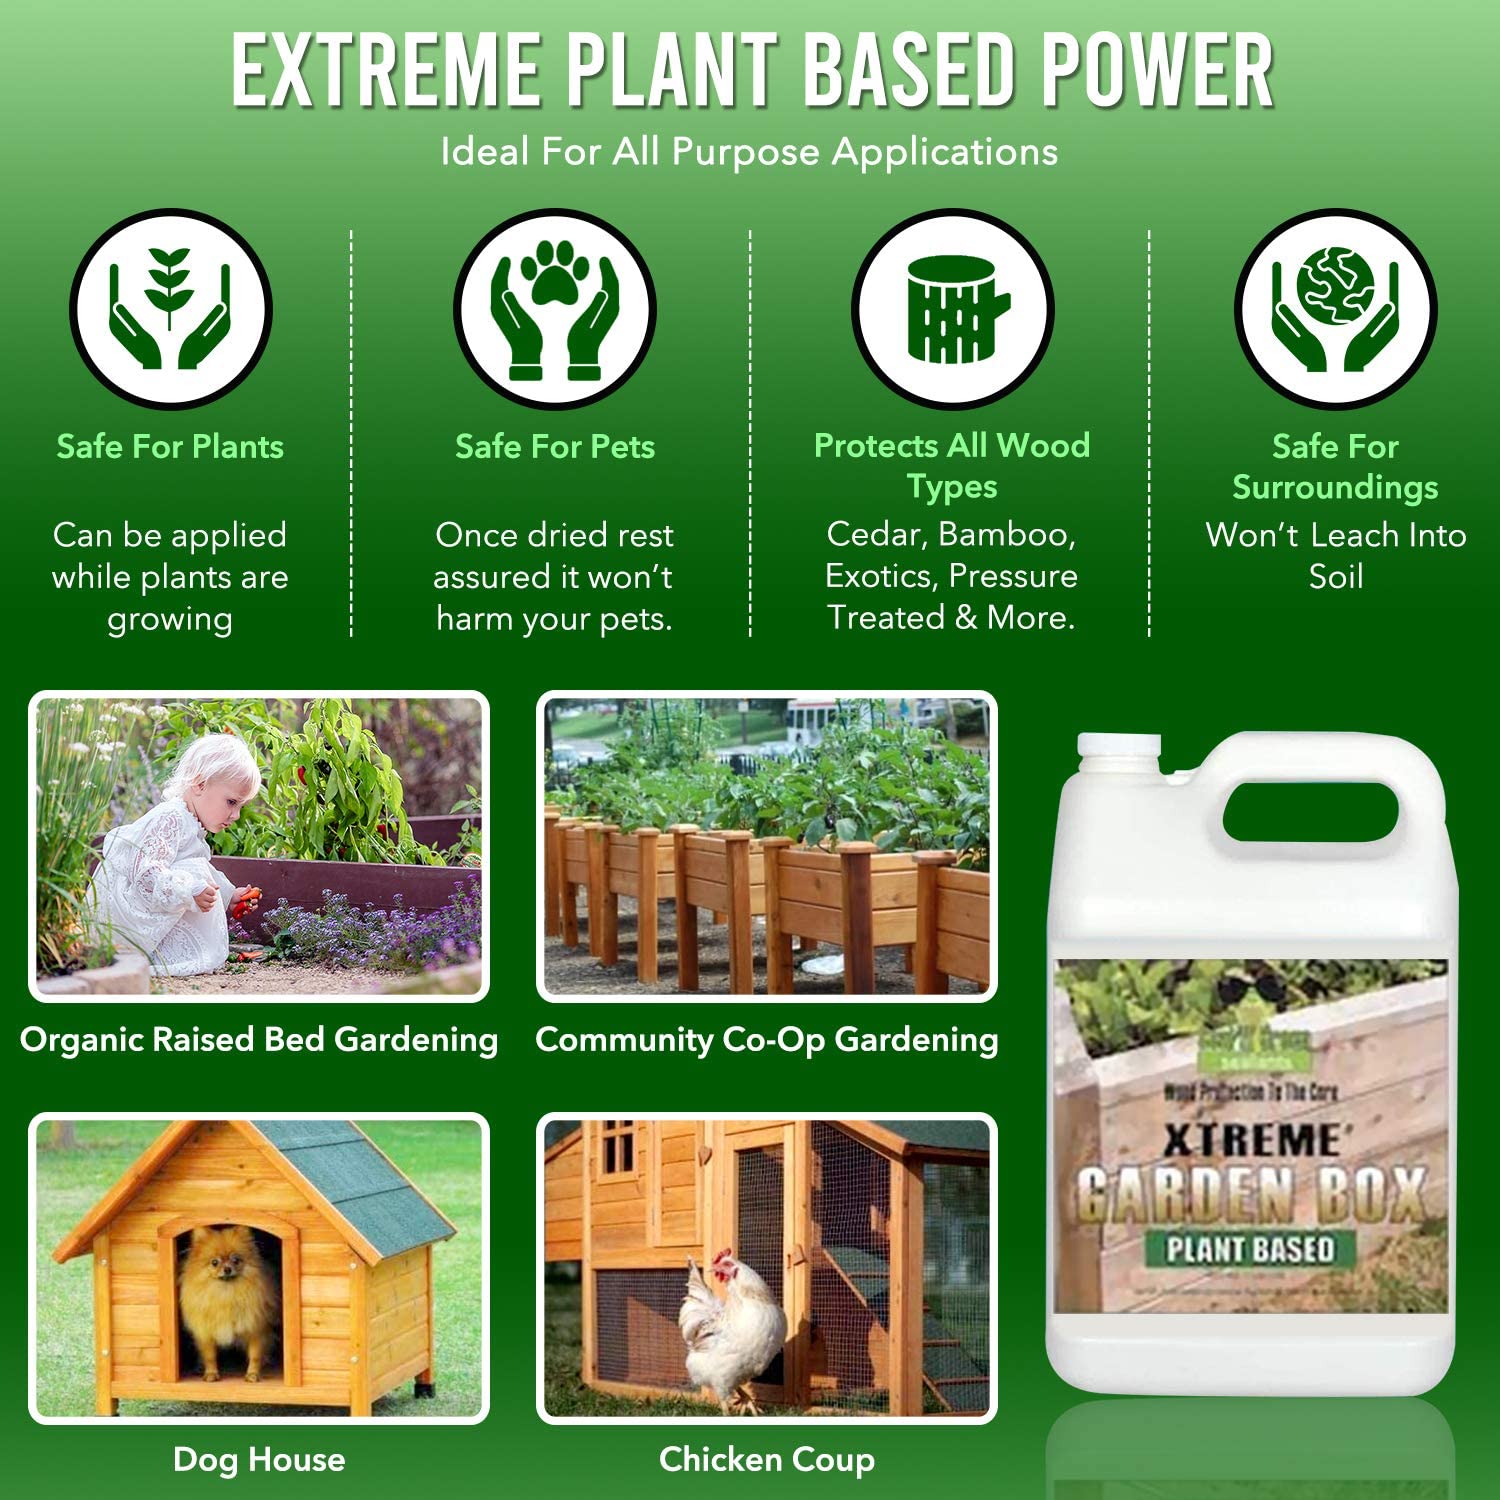 Garden Box Sealer | FDA Food Contact Safe Plant-Based Wood Sealant for Raised Beds, Planters & Pet Houses. Protects All Wood Types from Water & Weather Damage | Eco-Friendly Sustainable Solution